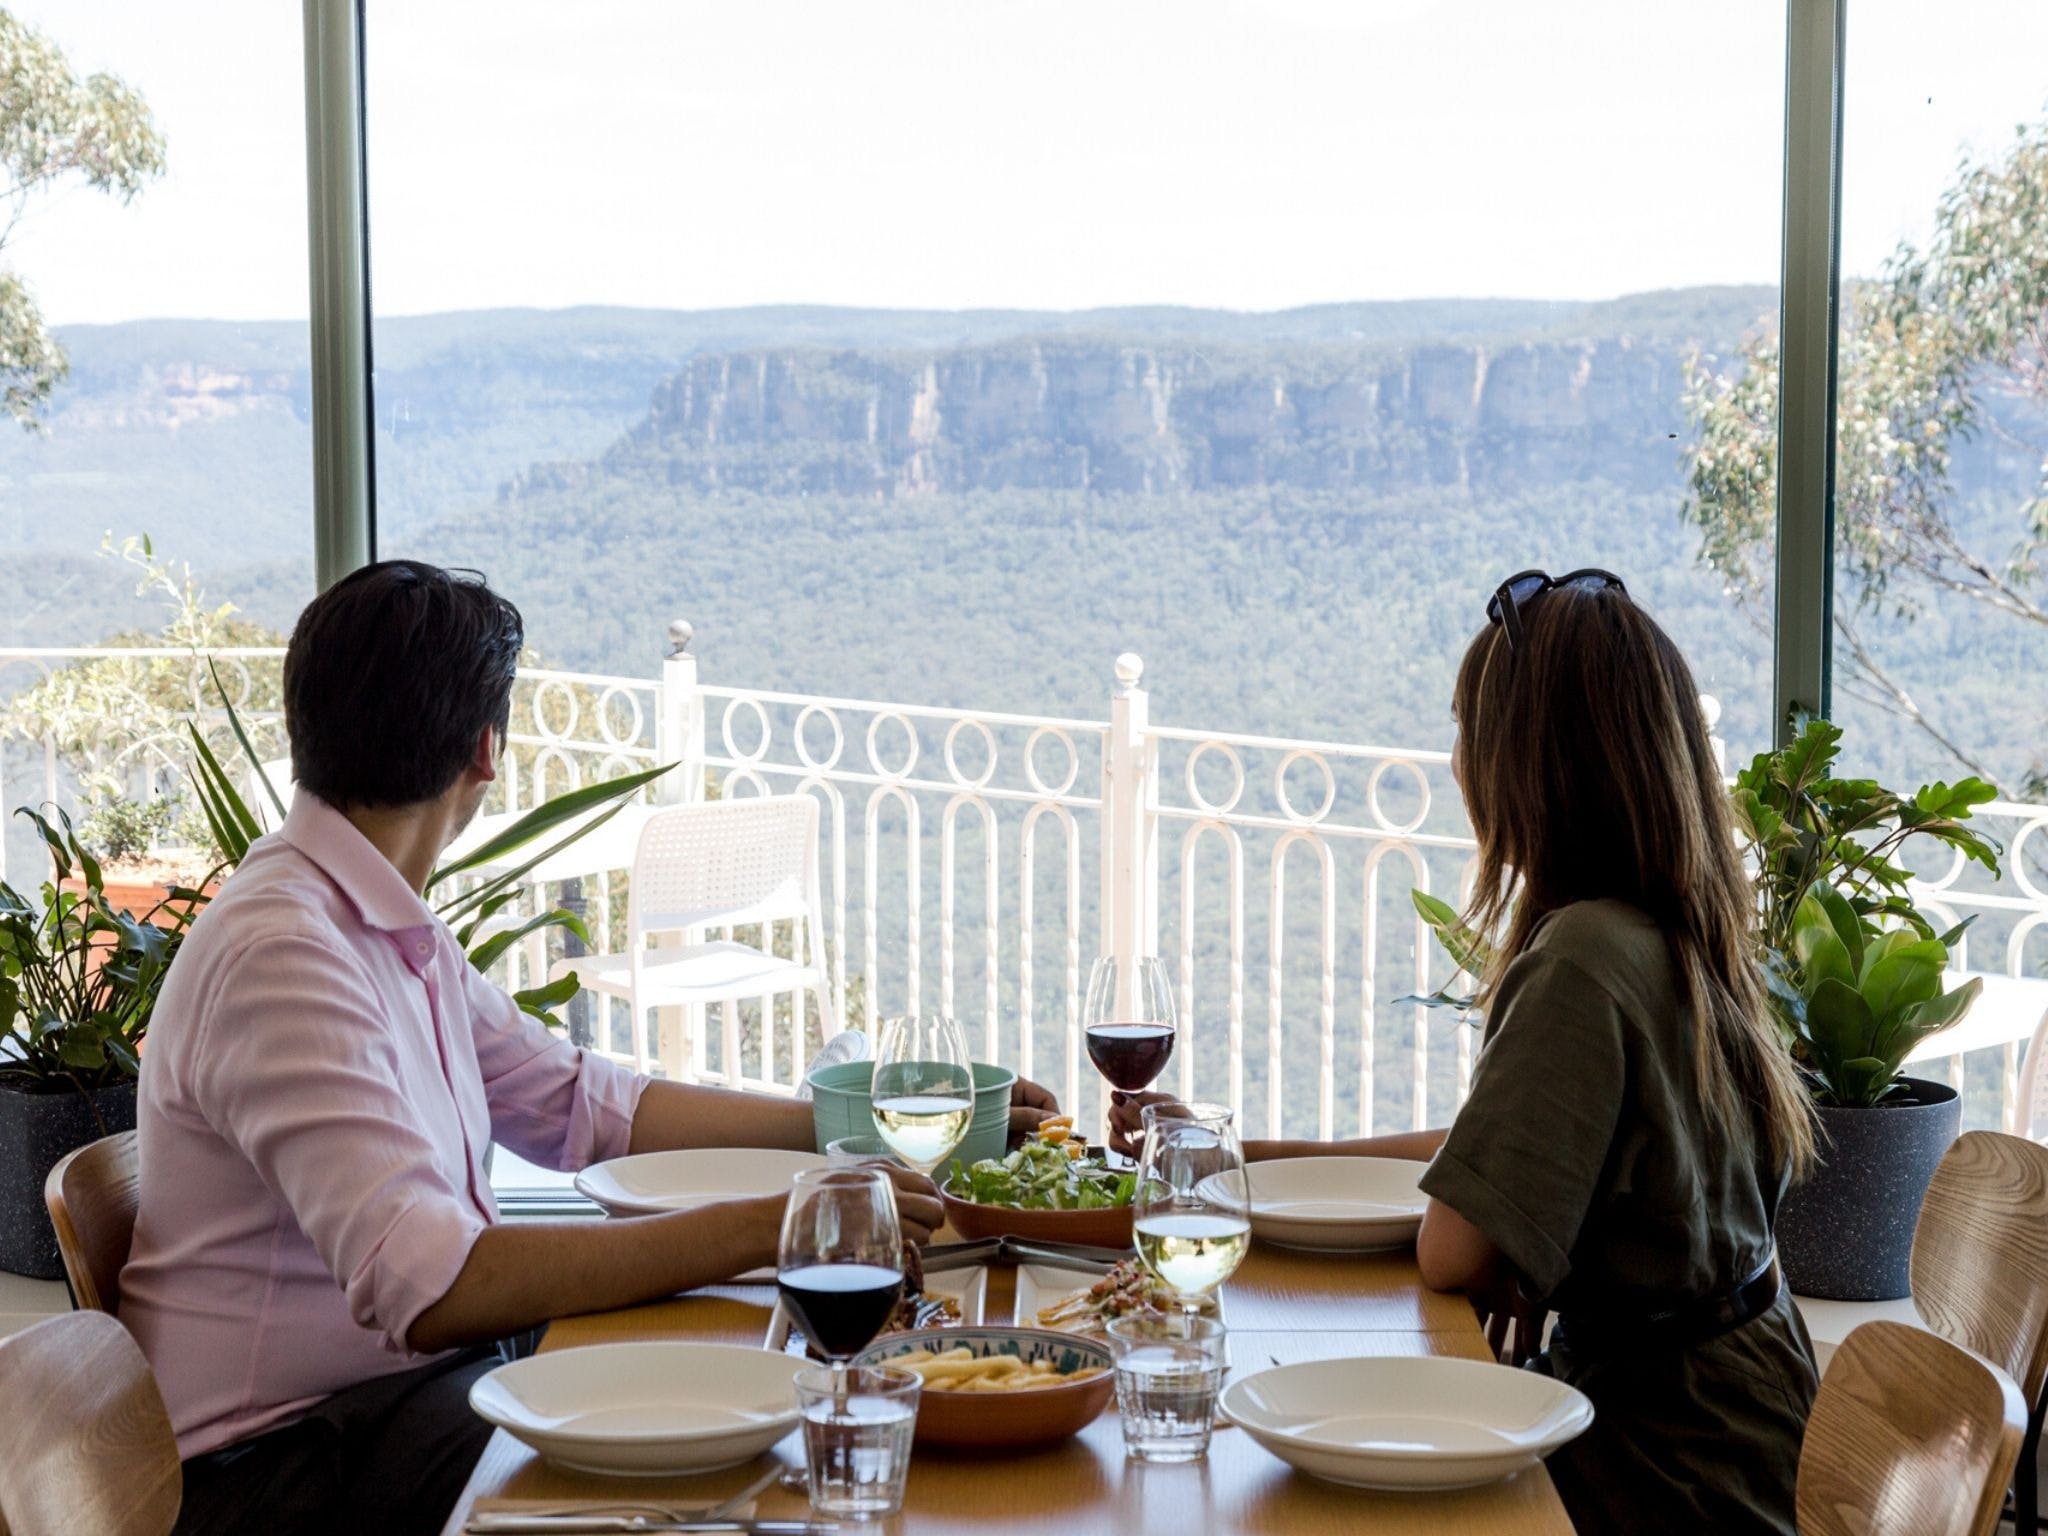 Christmas Day Lunch at The Lookout Echo Point - Grafton Accommodation